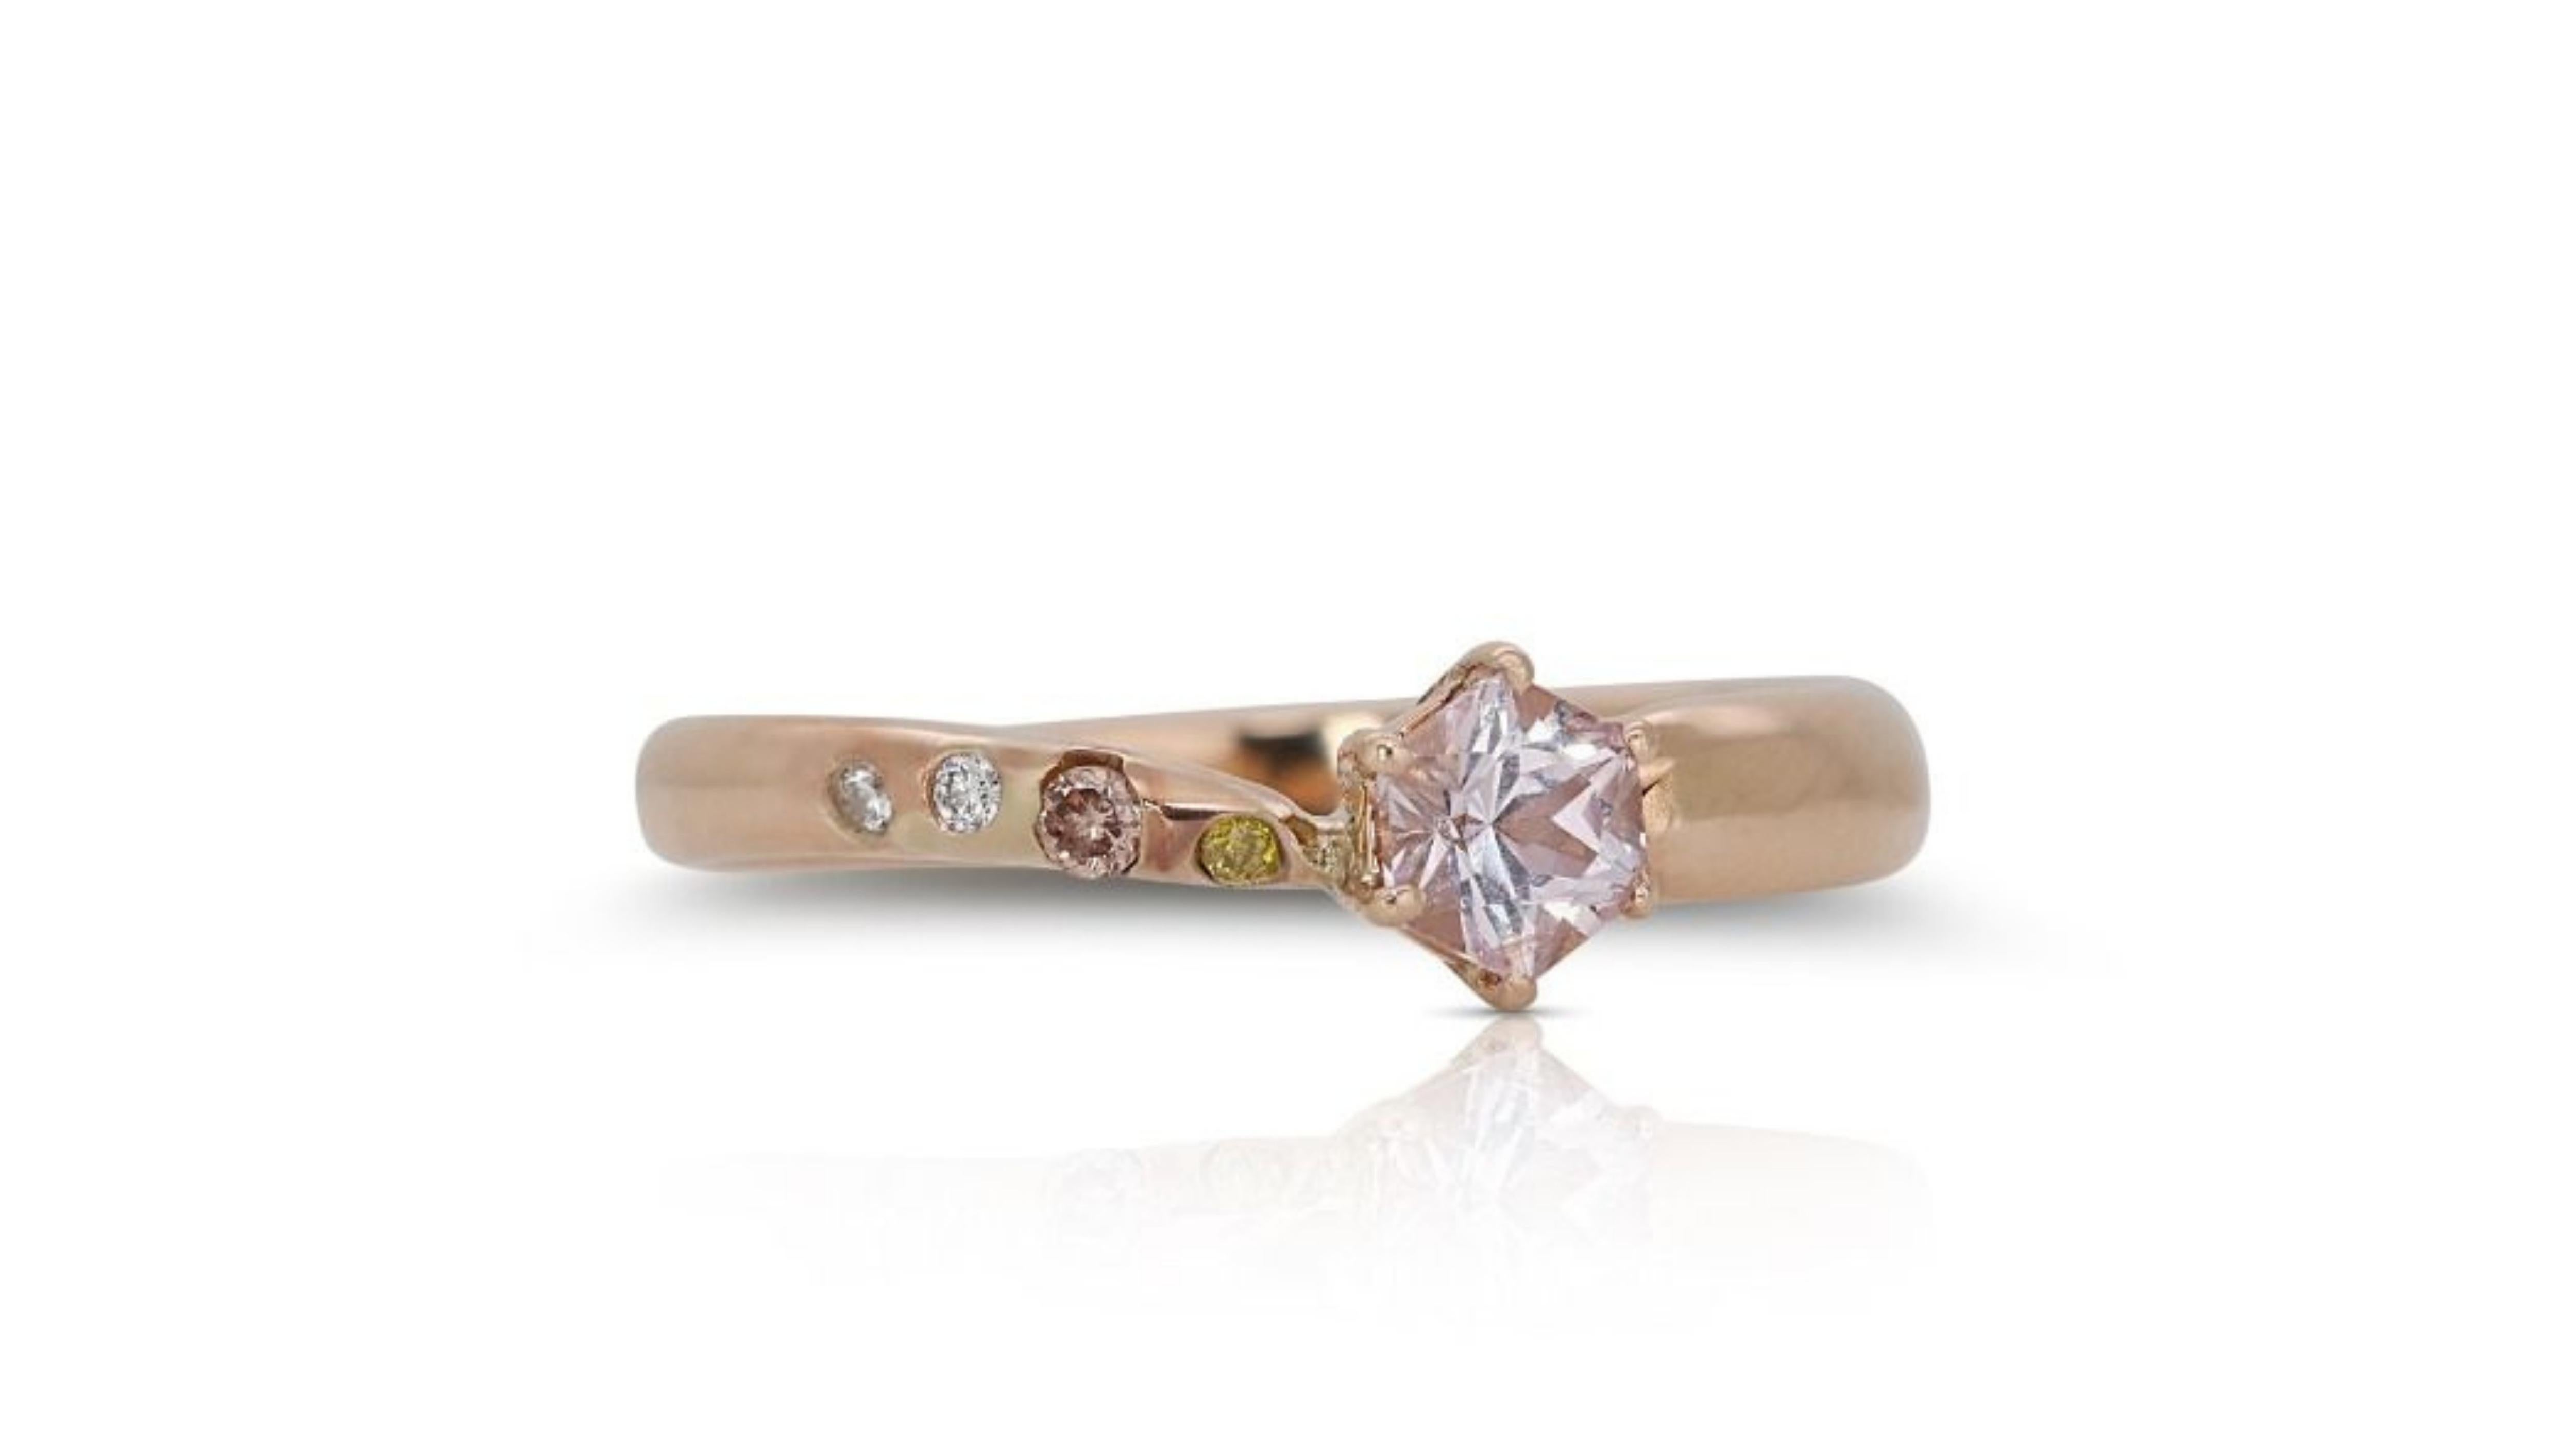 A dazzling pendant crafted from 18K rose gold, this exquisite piece features a captivating .05 carat round brilliant diamond as its centerpiece. The breathtaking main stone boasts a captivating - color and exceptional VS clarity, while a halo of